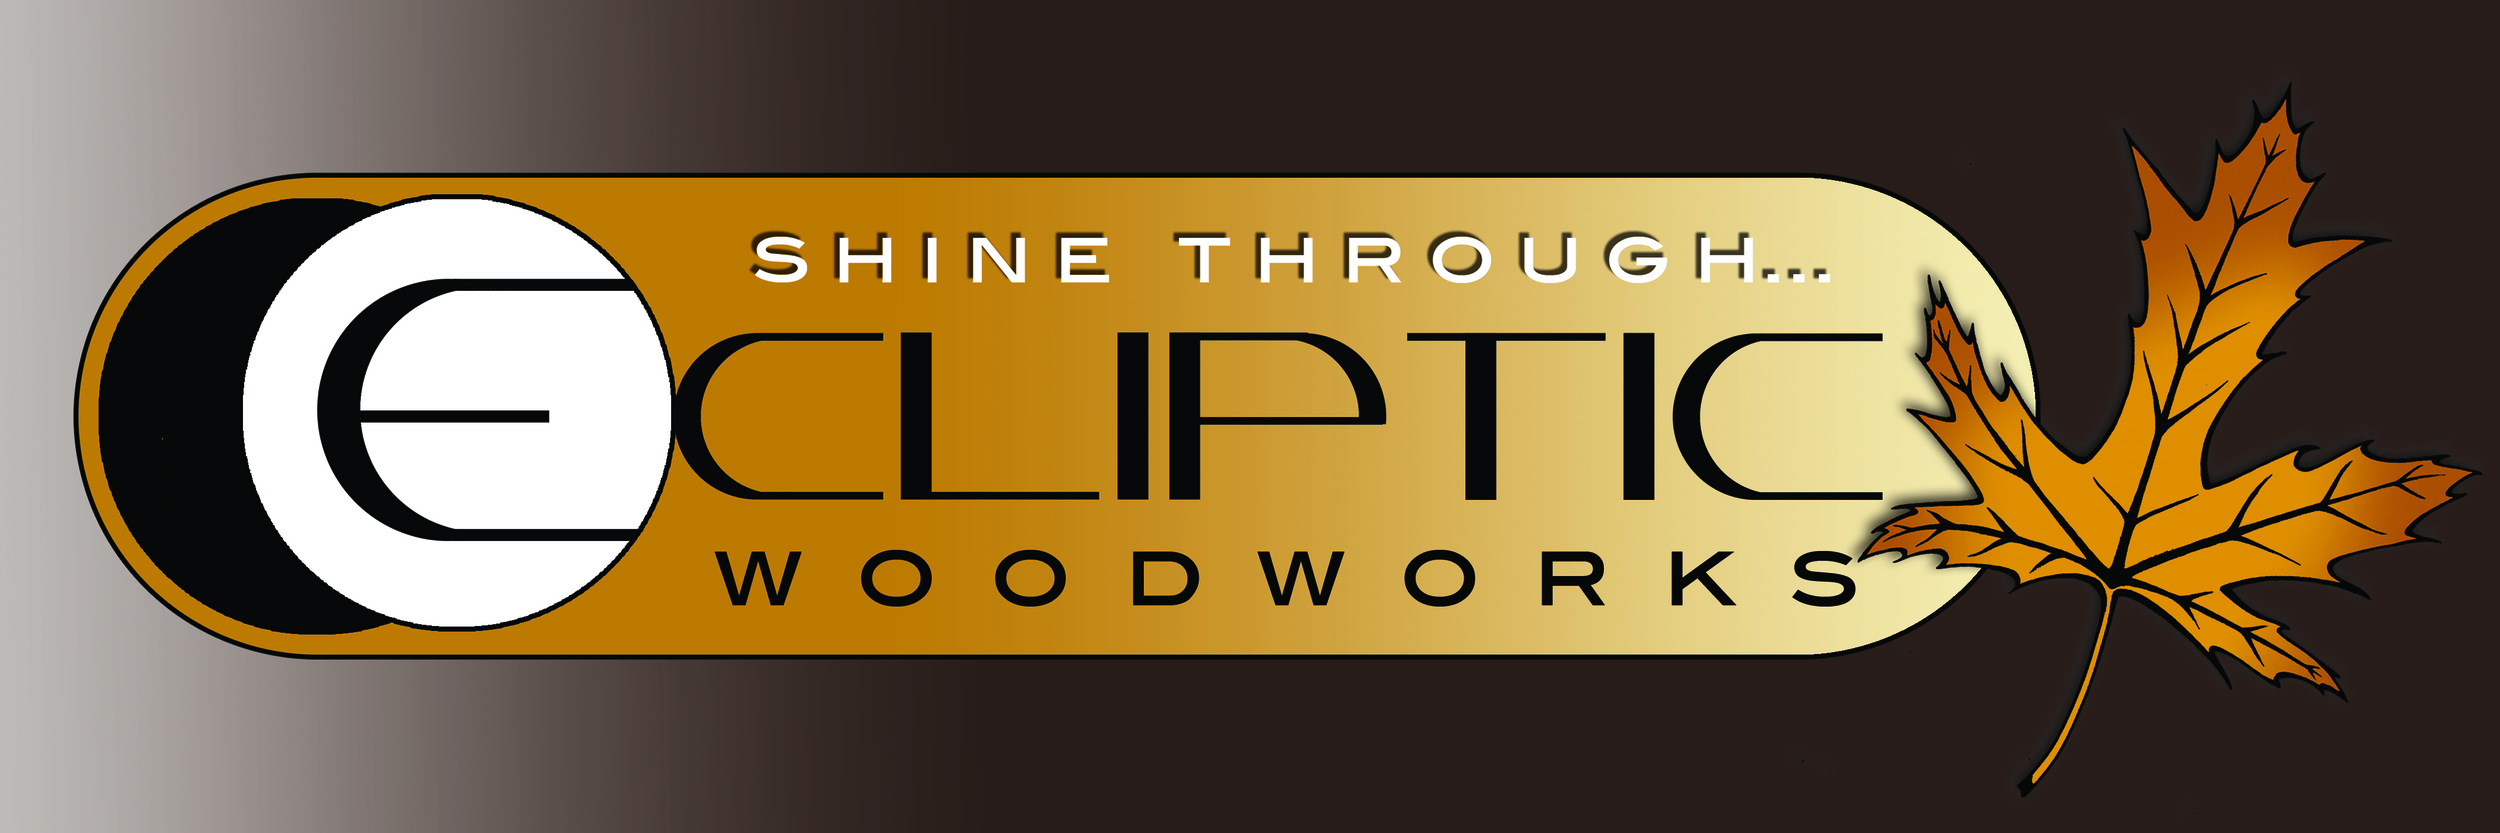 Ecliptic Woodworks